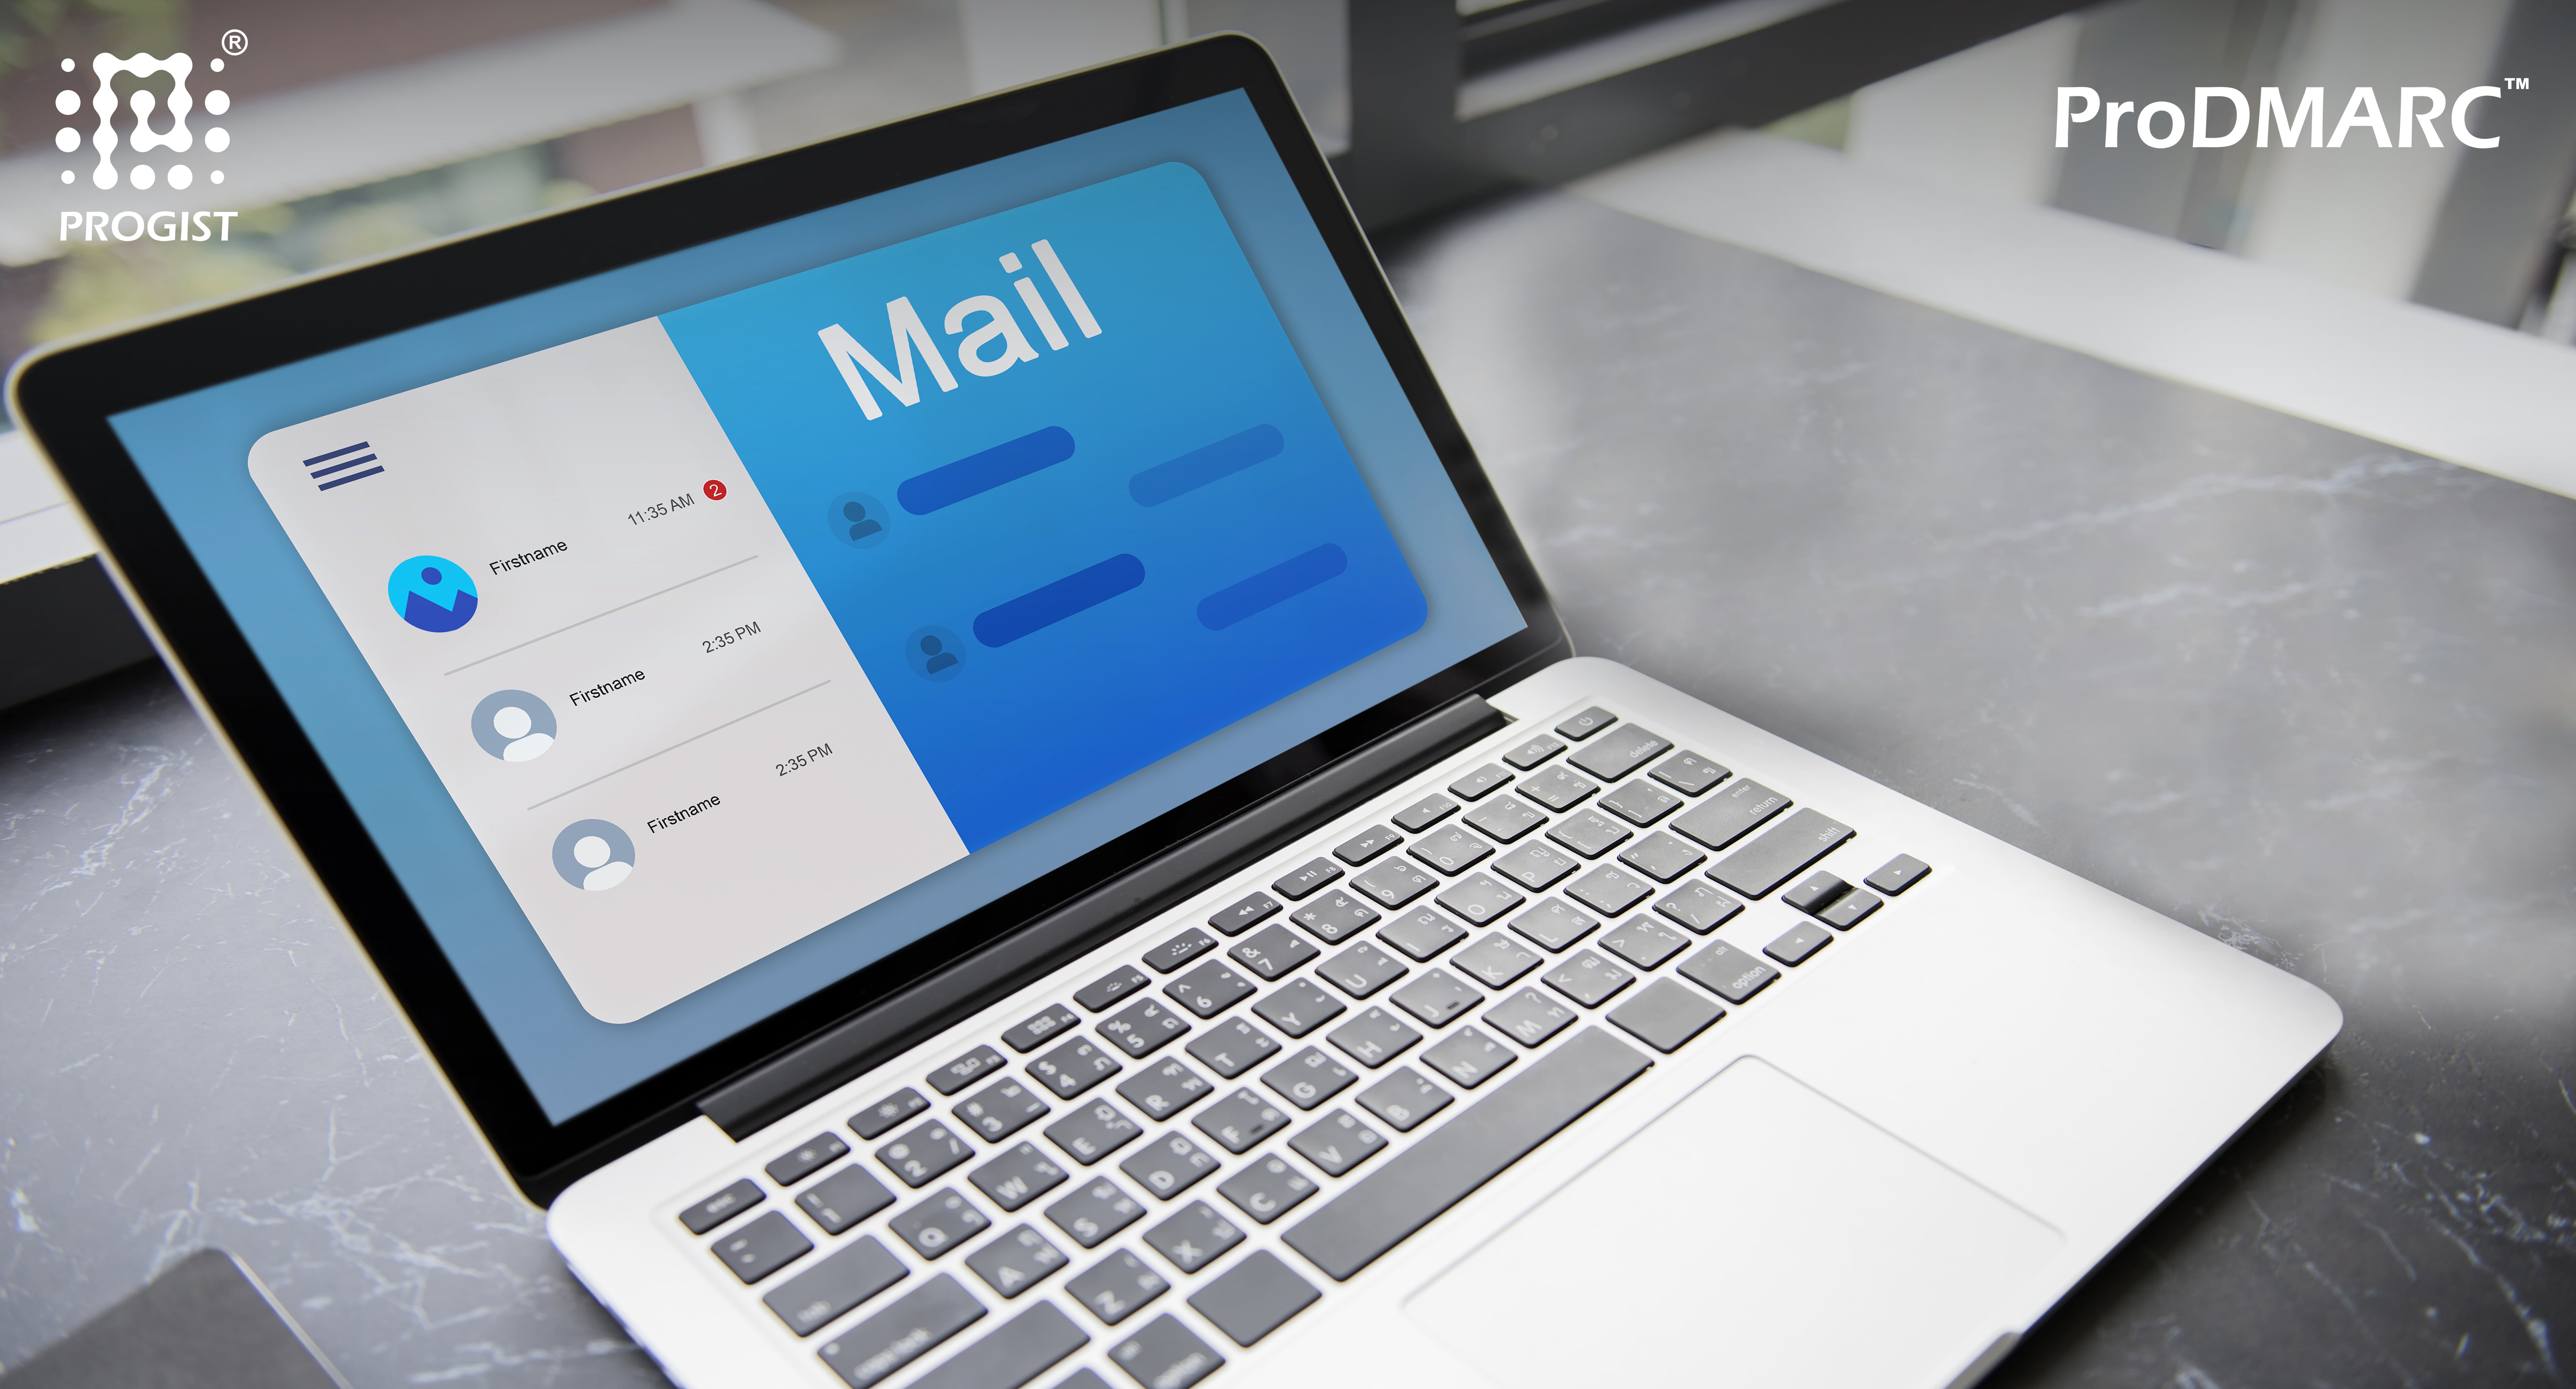 Gmail embraces BIMI to authenticate emails with verified logos